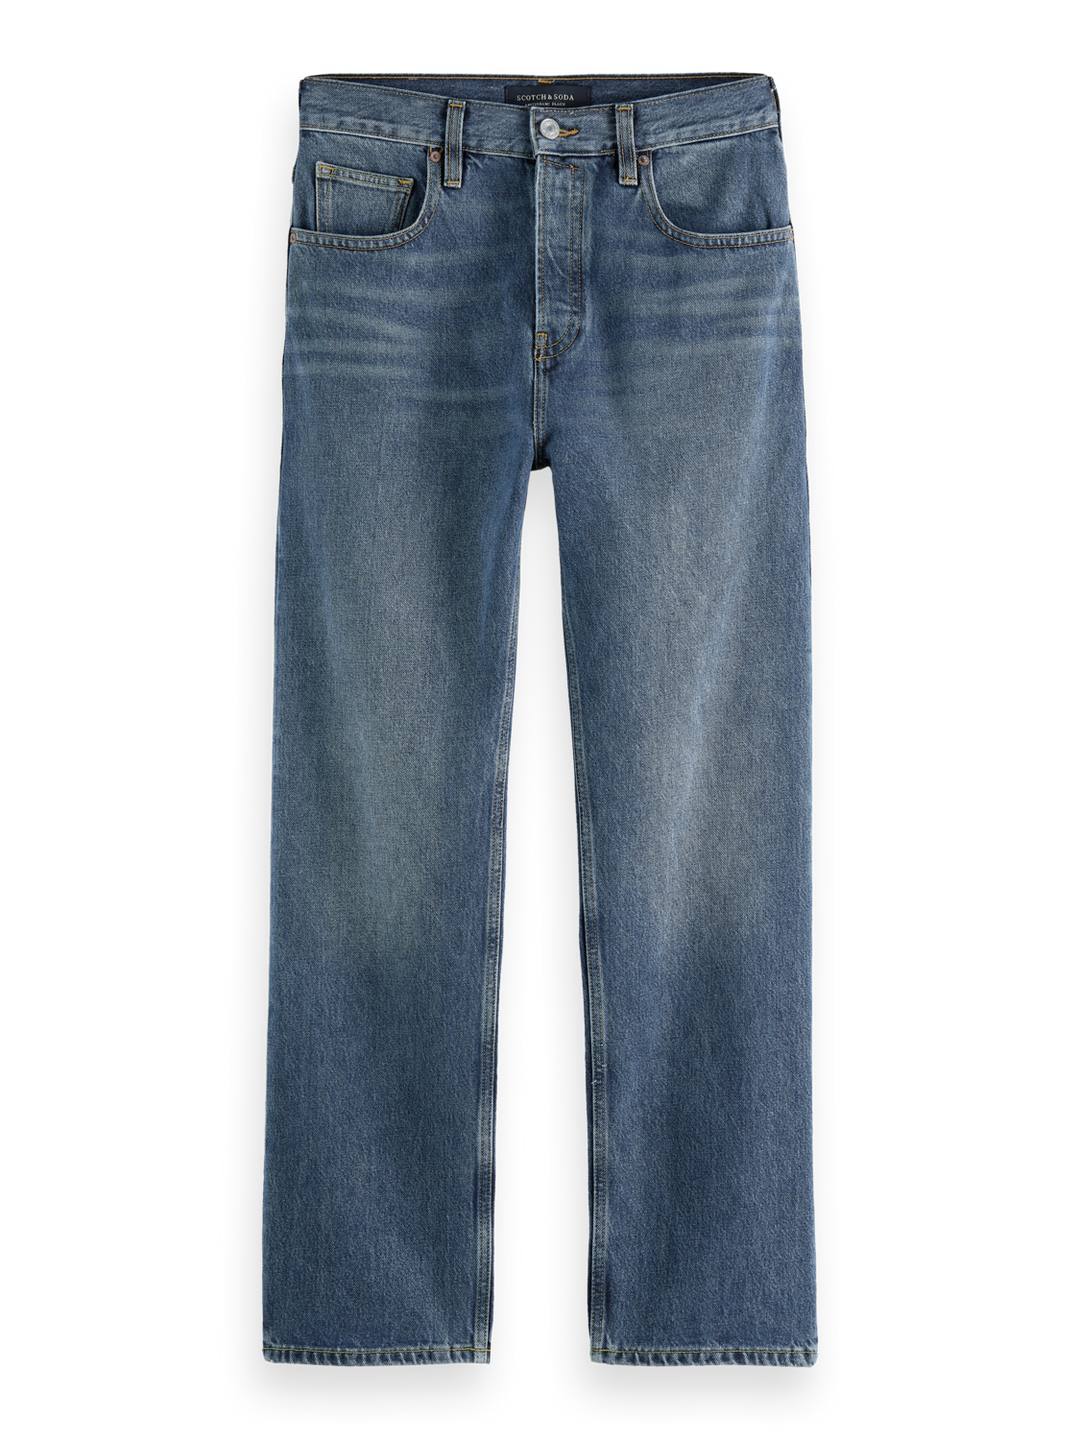 The Vert Straight Cut Jeans in Organic Cotton Strike a Chord | Buster McGee